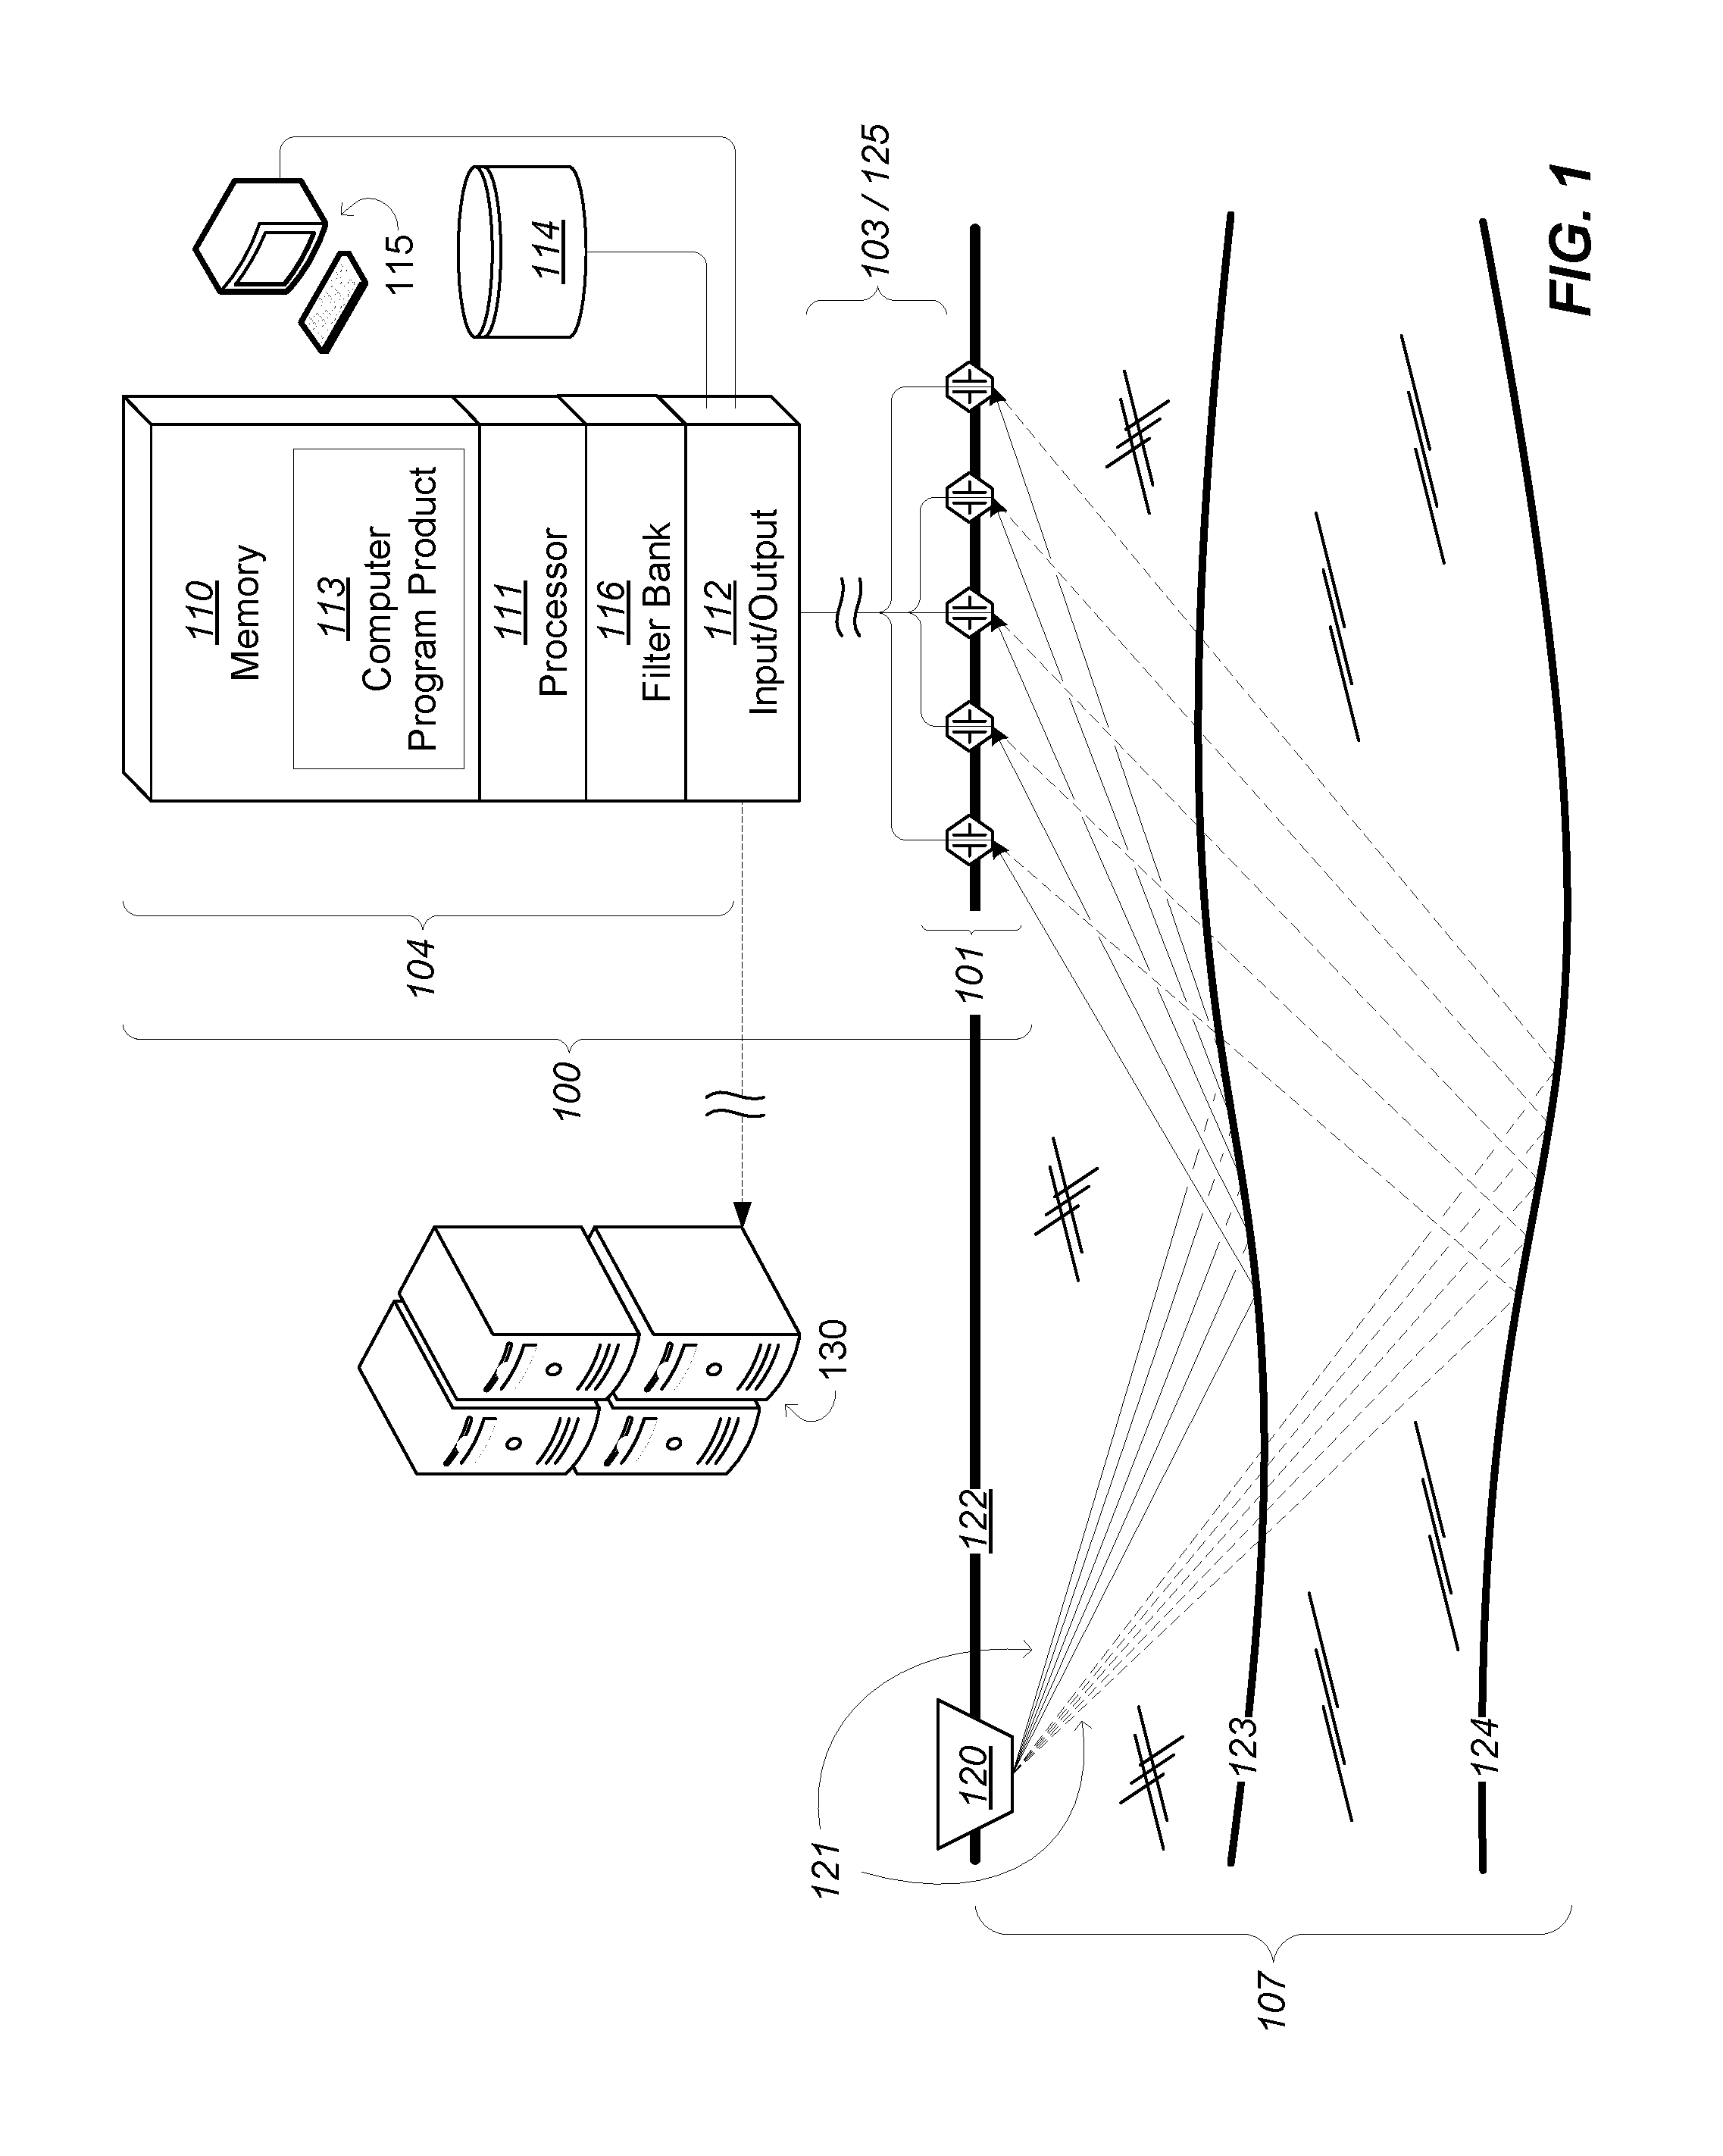 System, Machine, and Computer-Readable Storage Medium for Forming an Enhanced Seismic Trace Using a Virtual Seismic Array